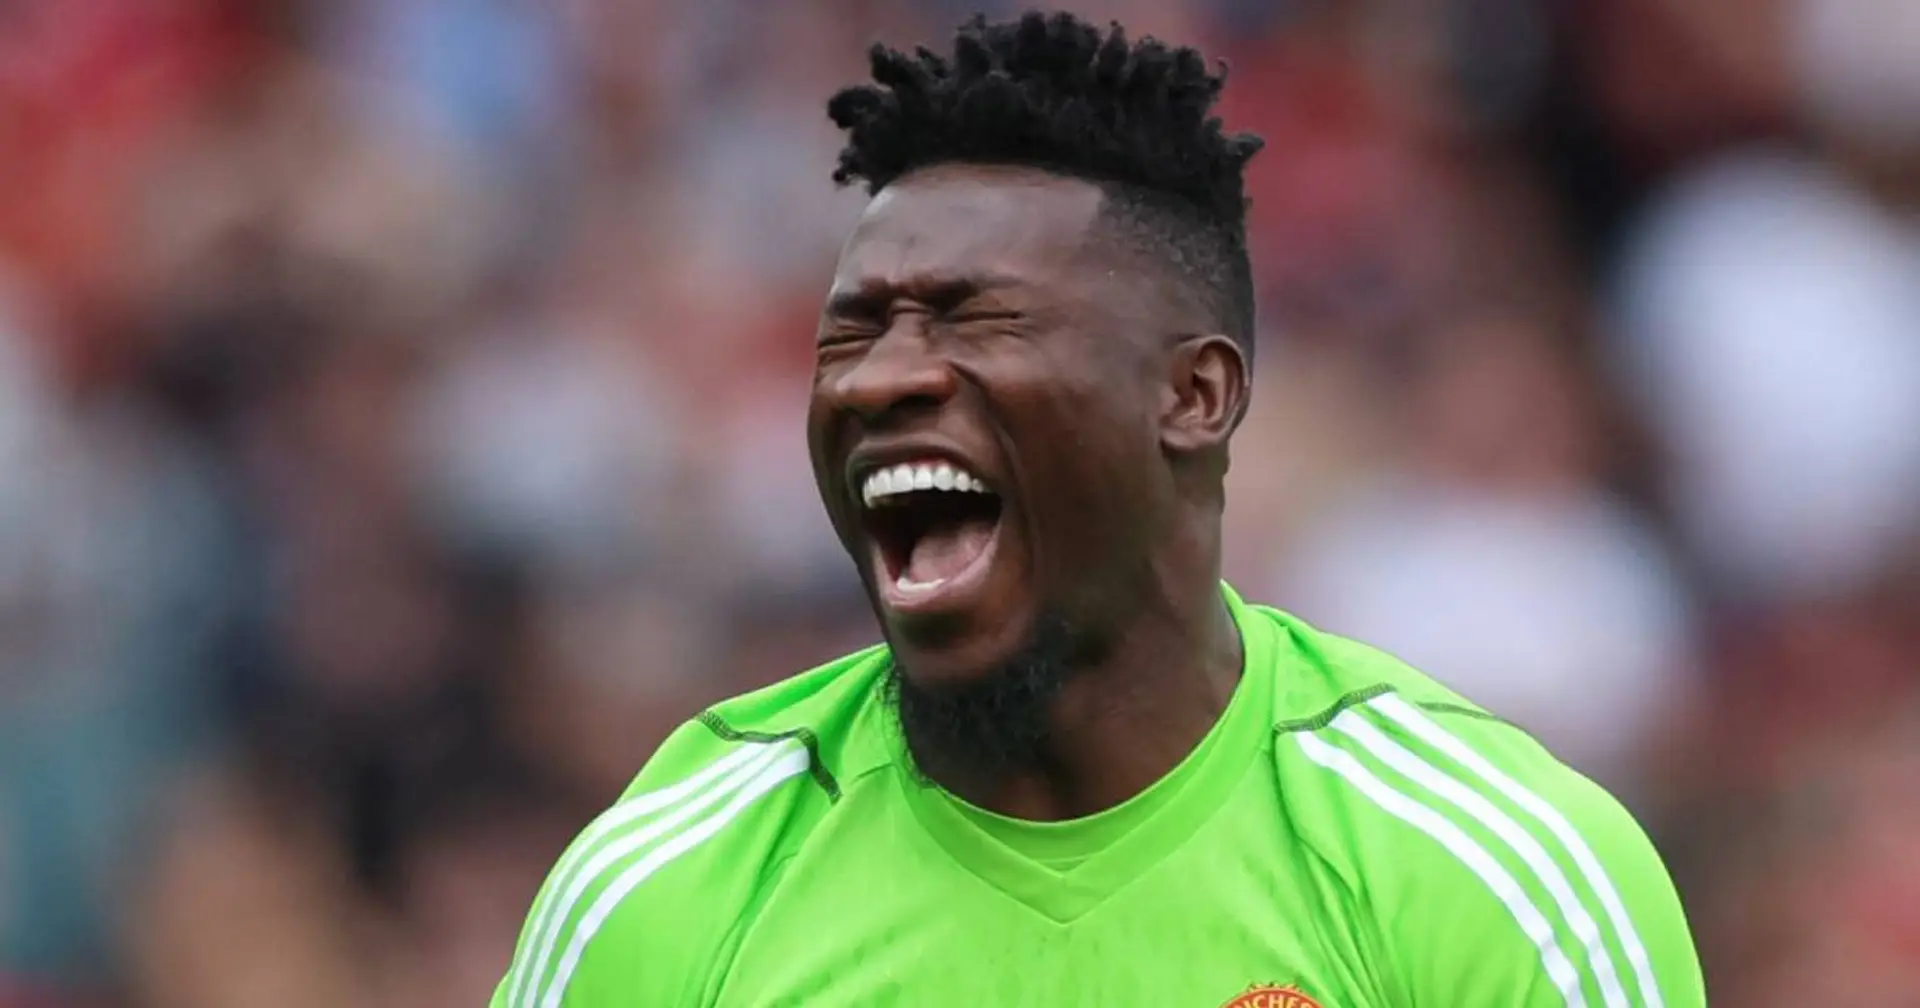 'What are his strengths?': Andre Onana told he has too many weaknesses to survive at Man United